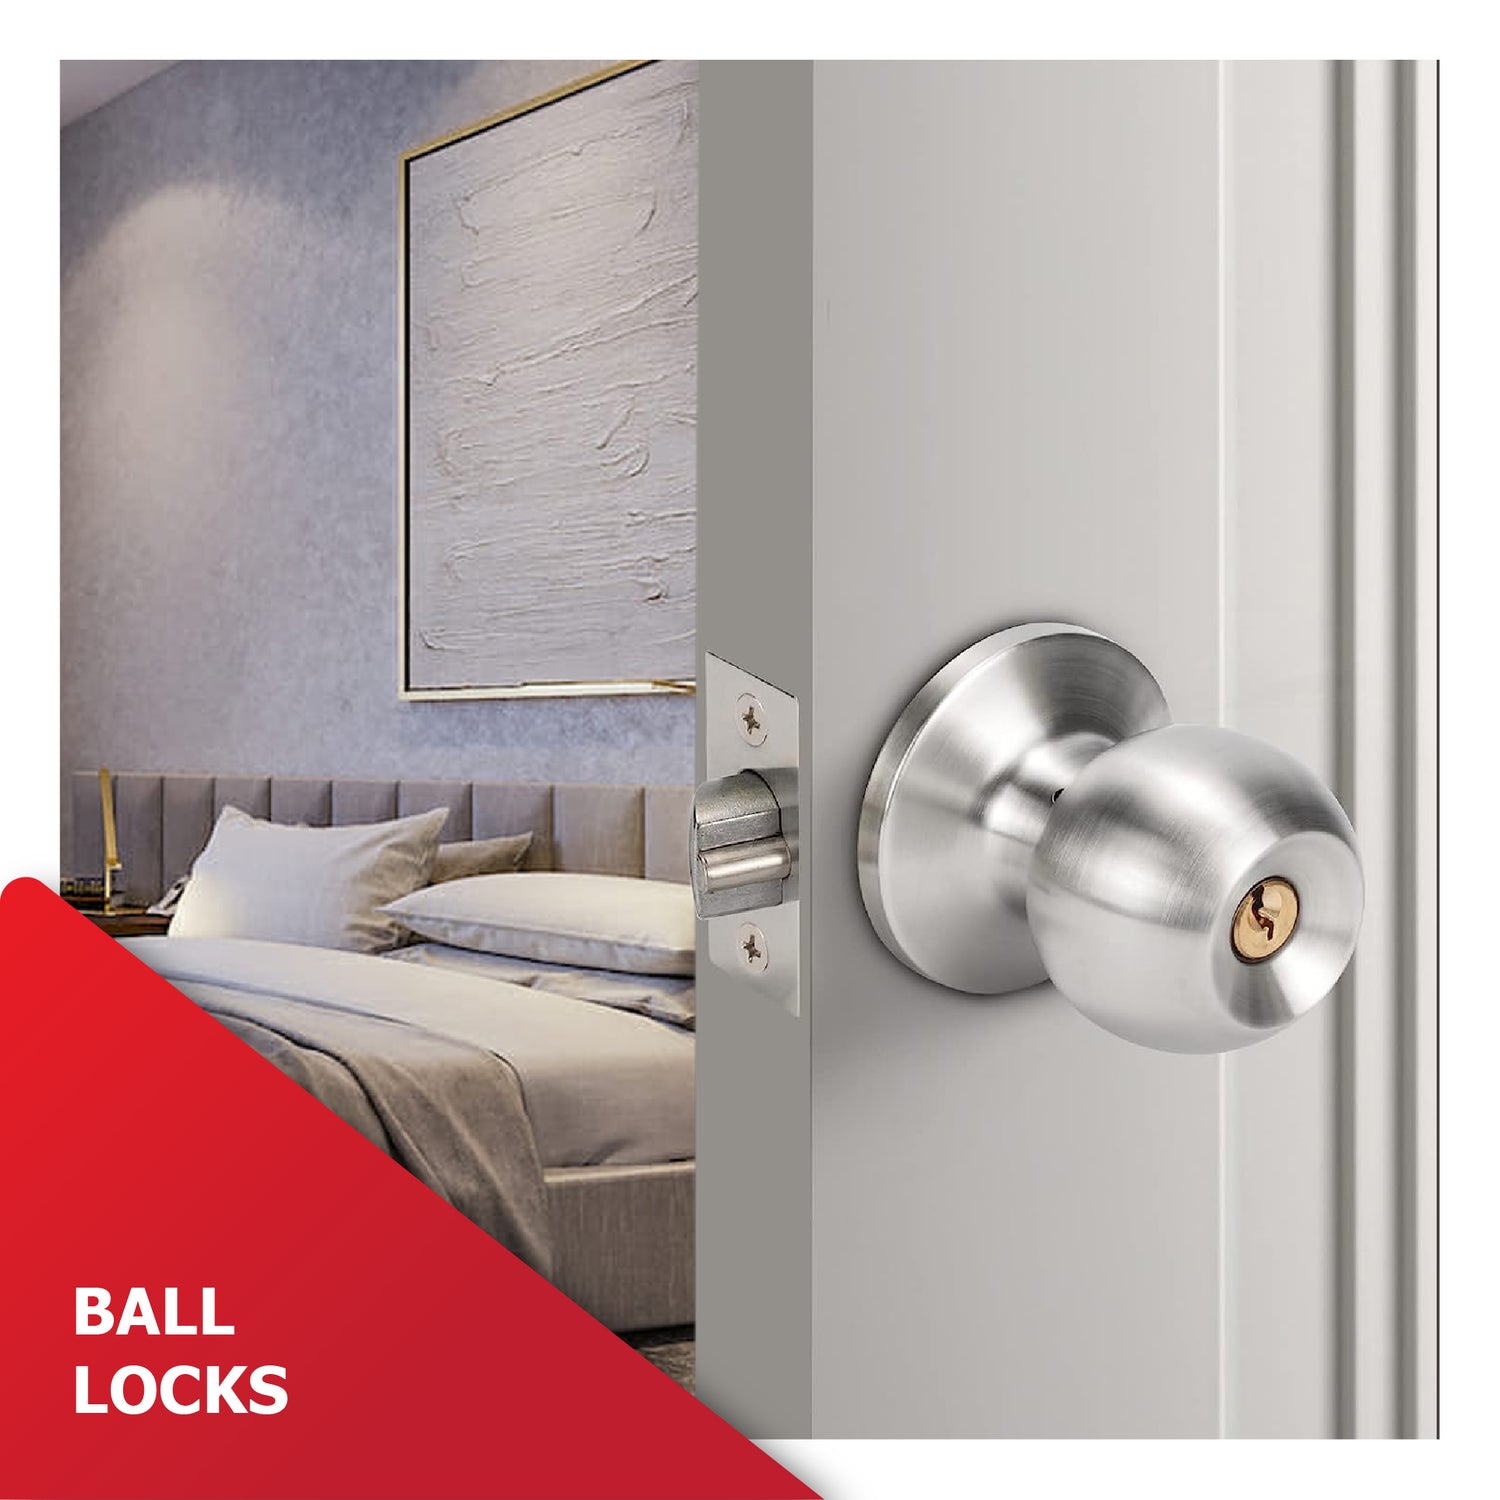 Ball locks - Reliable and durable security solutions for enhanced protection.